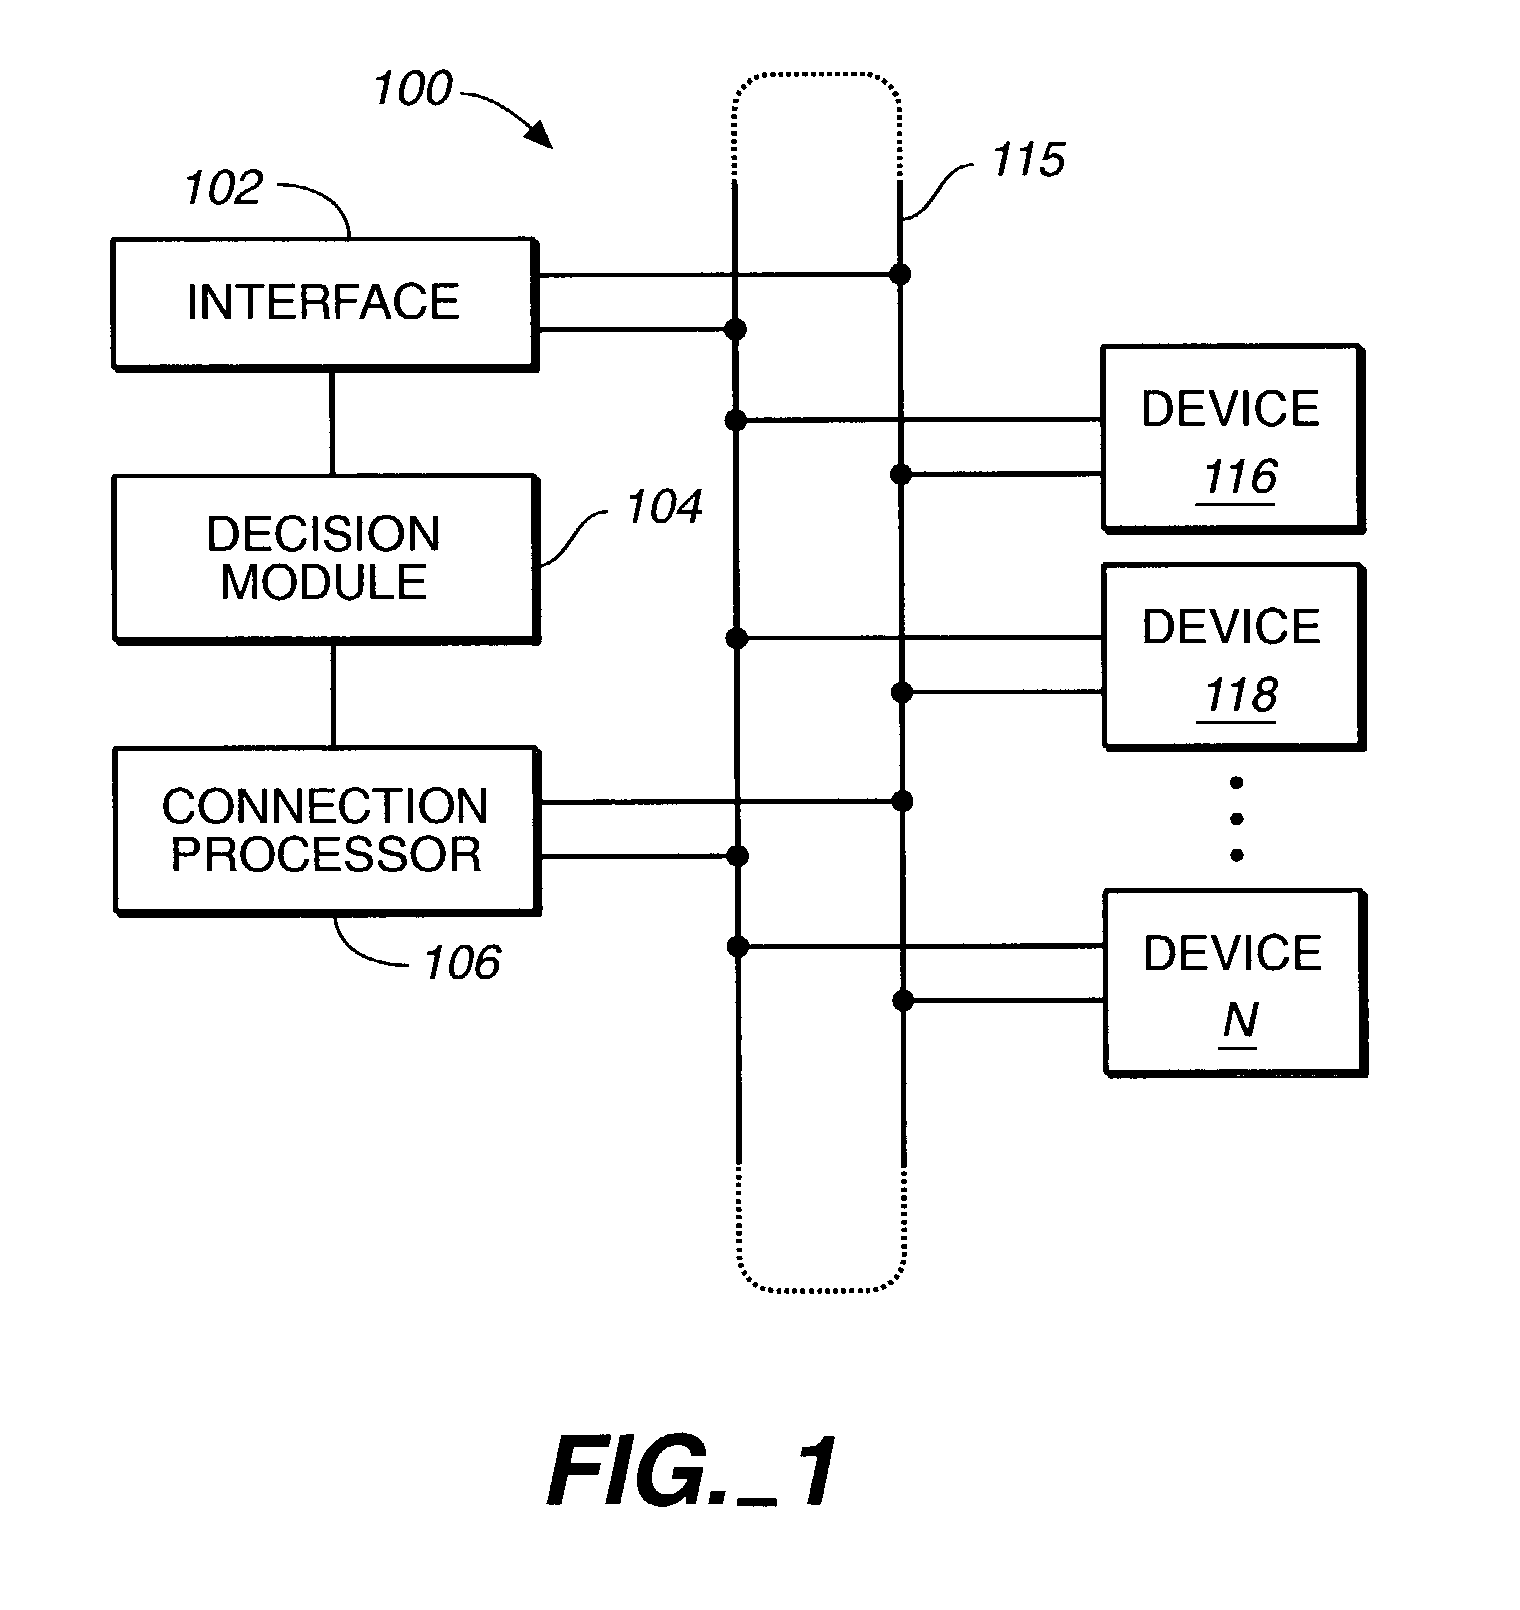 Method and apparatus for identifying one or more devices having faults in a communication loop